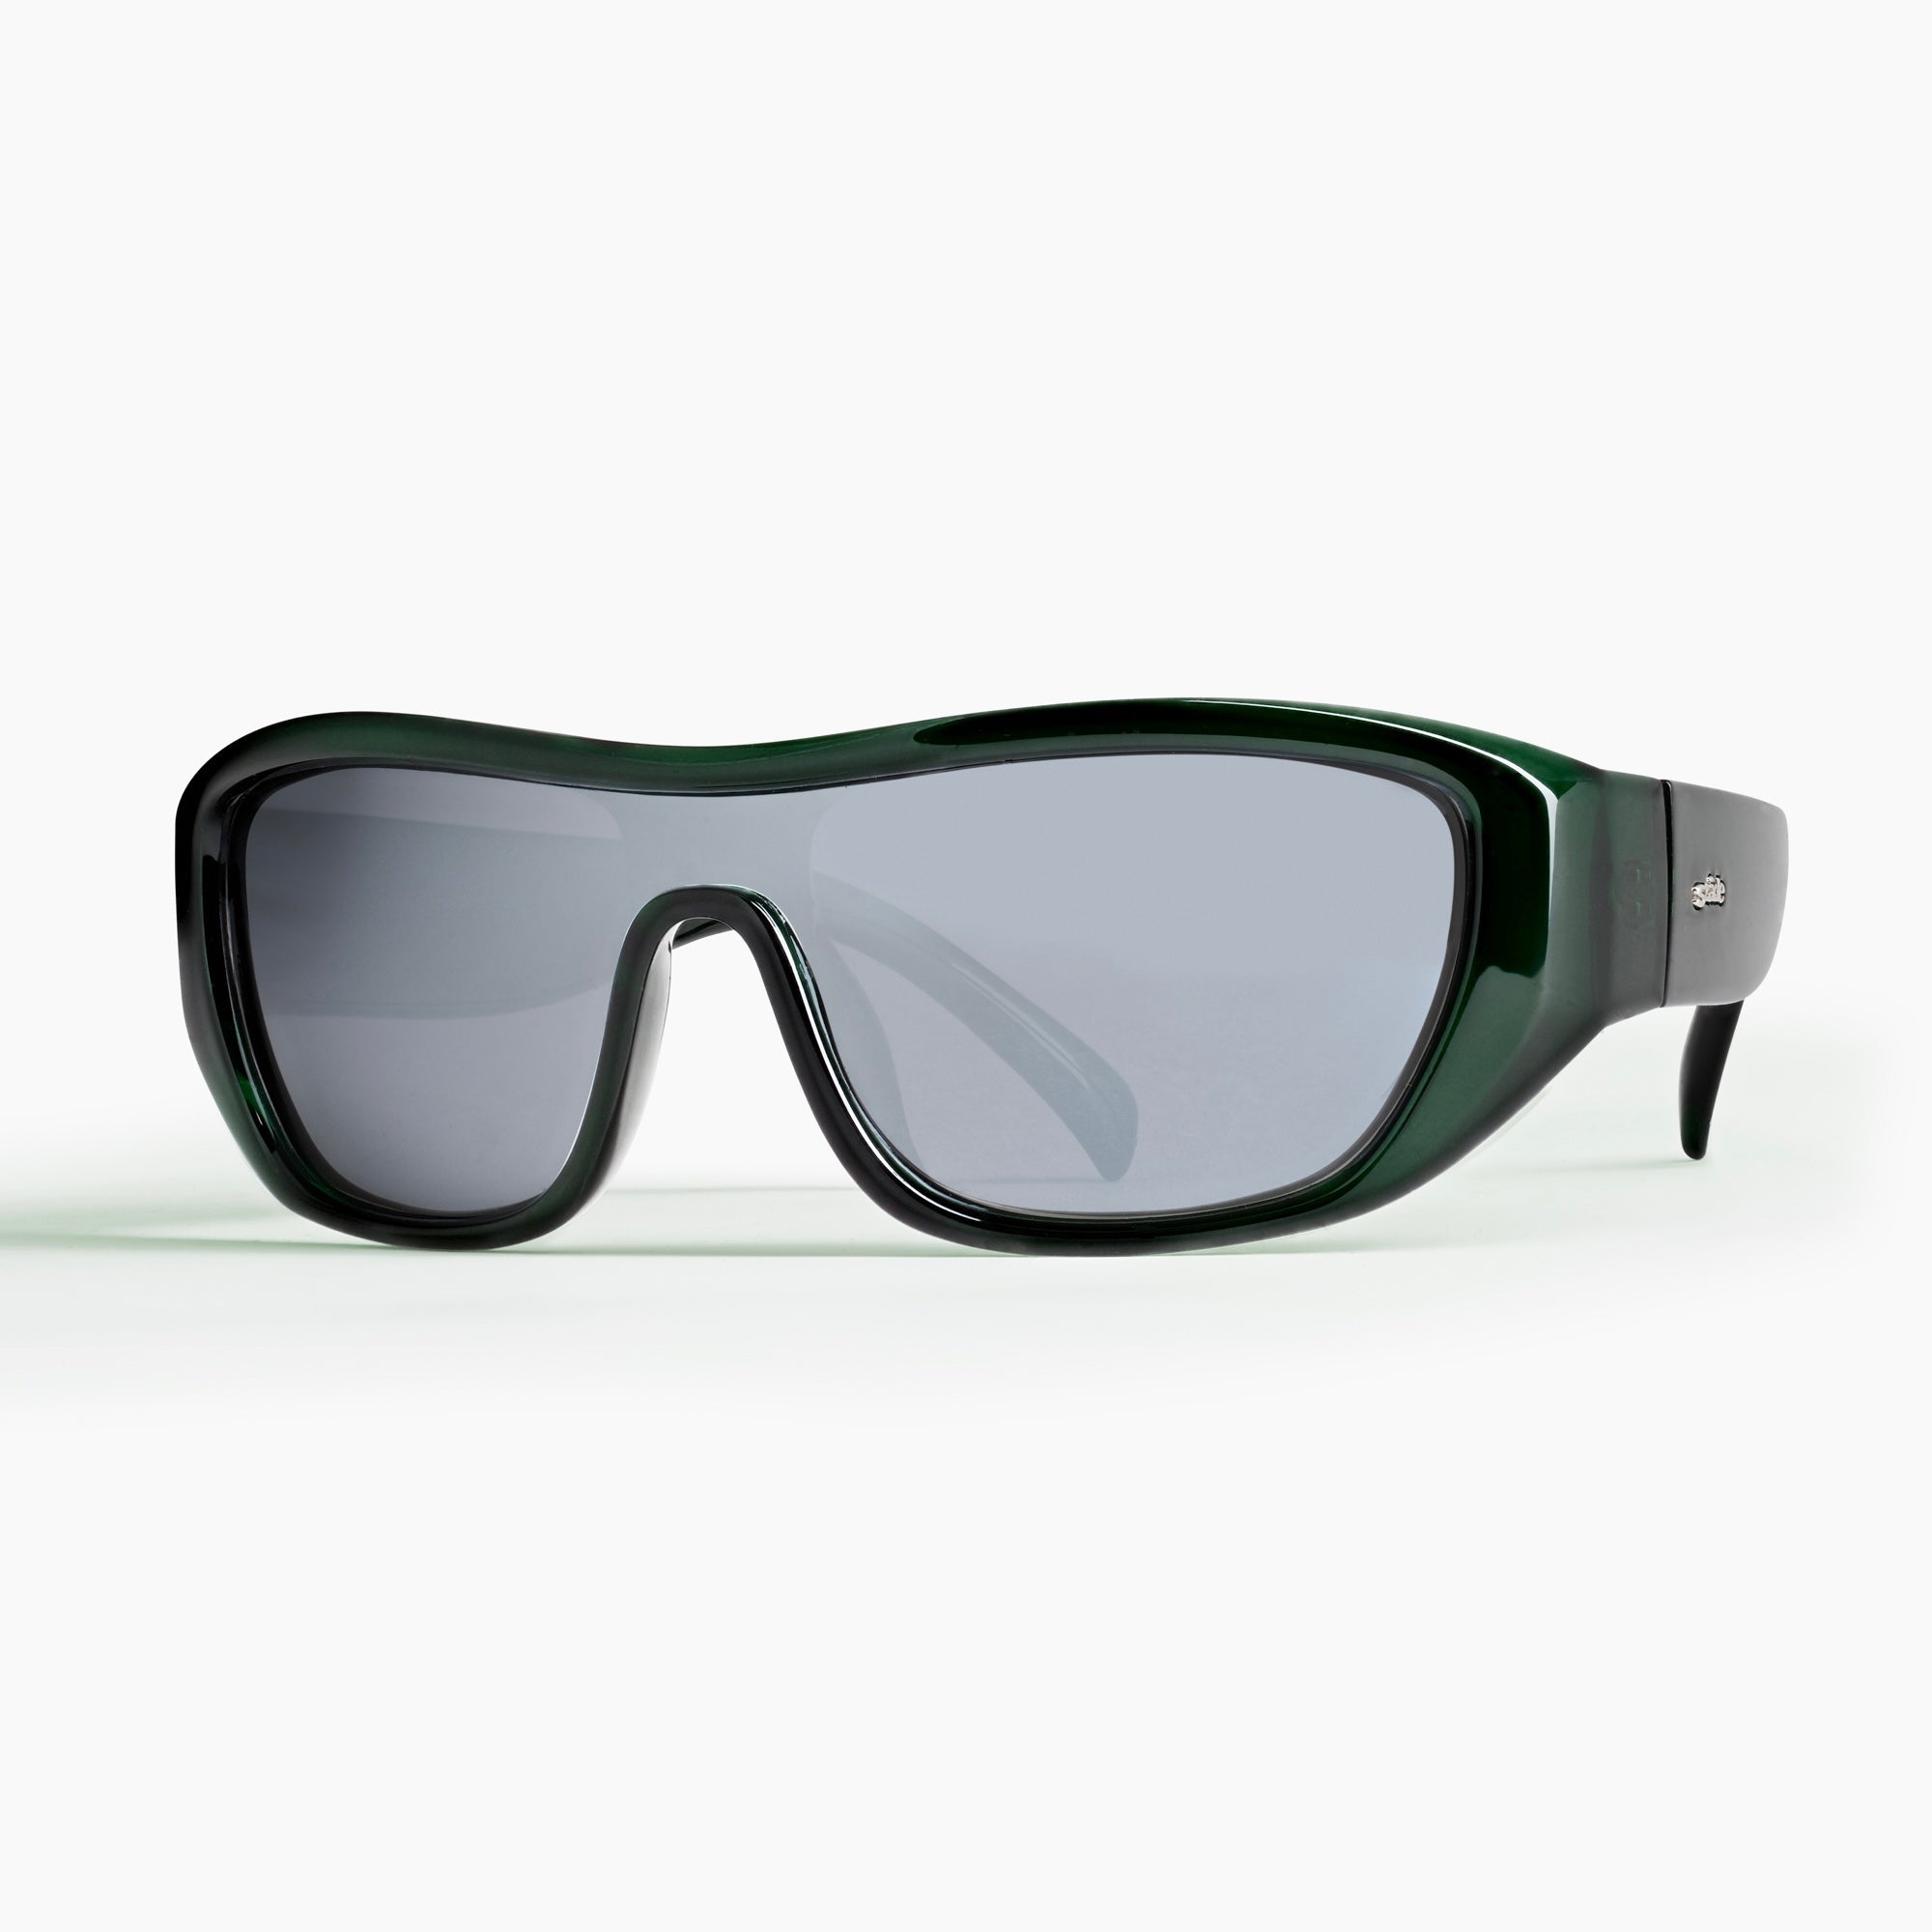 Lexen Sunglasses in racing green and chrome polarized